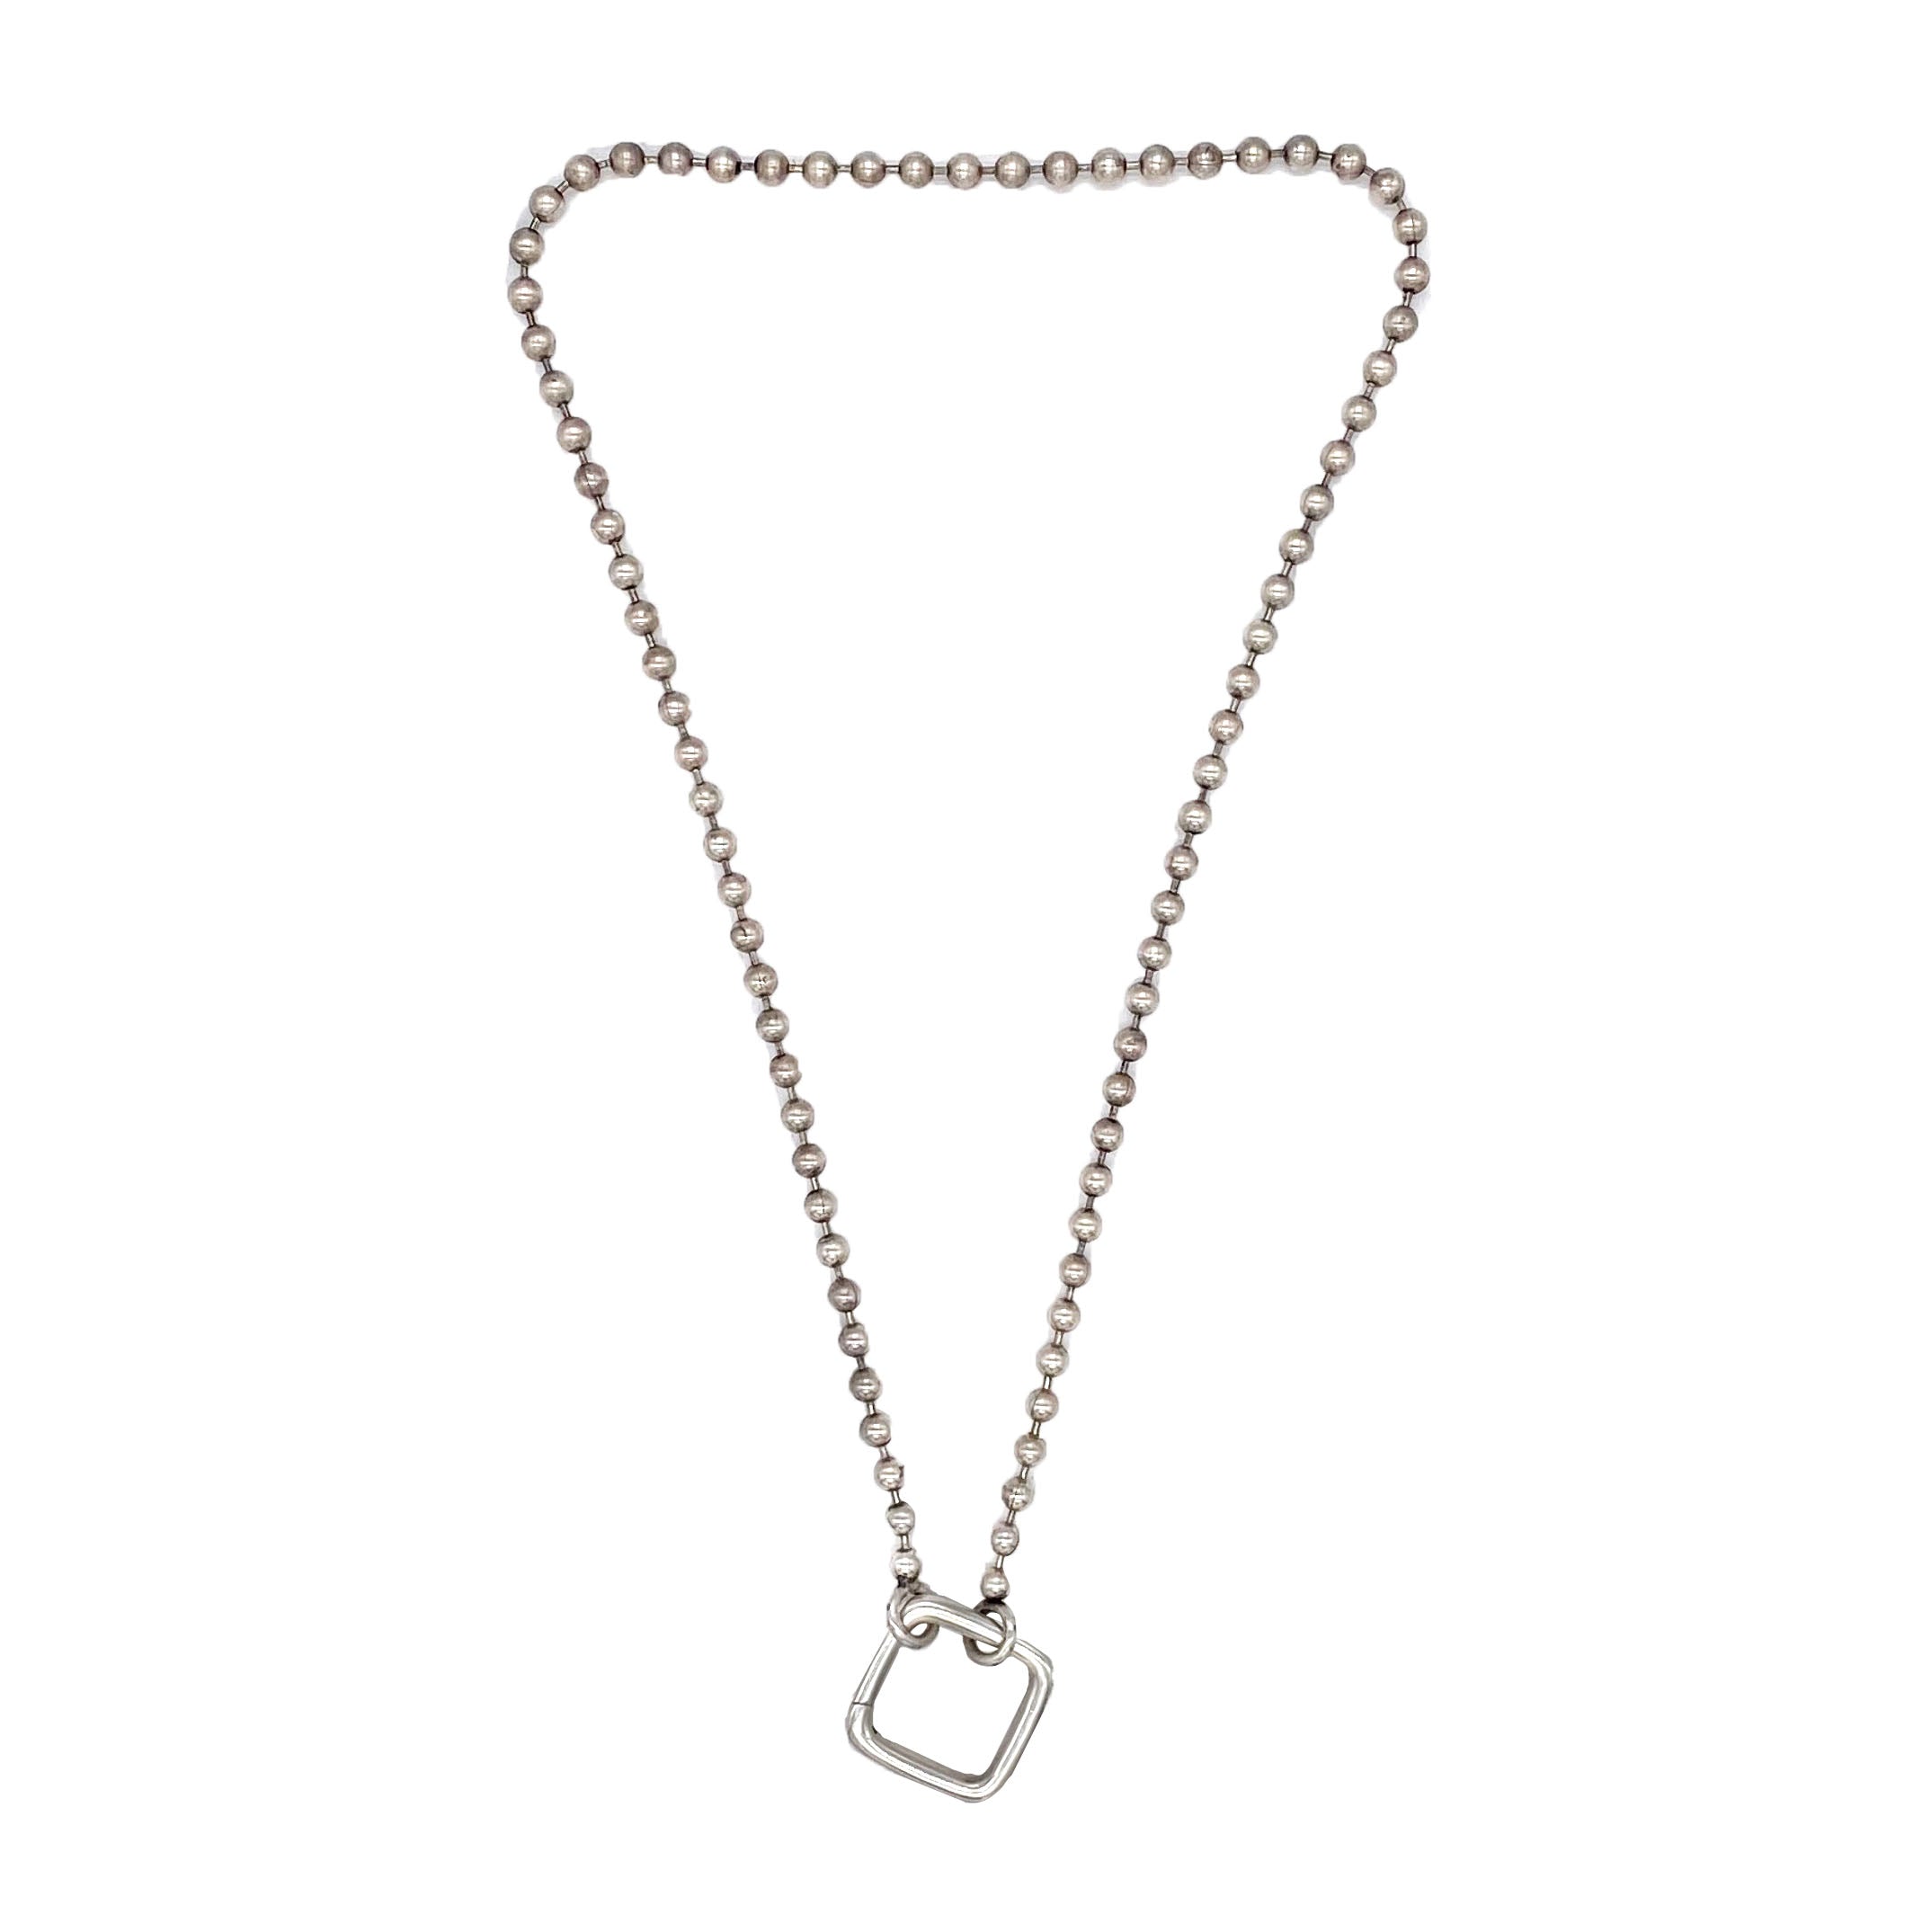 Dylan Charm Necklace